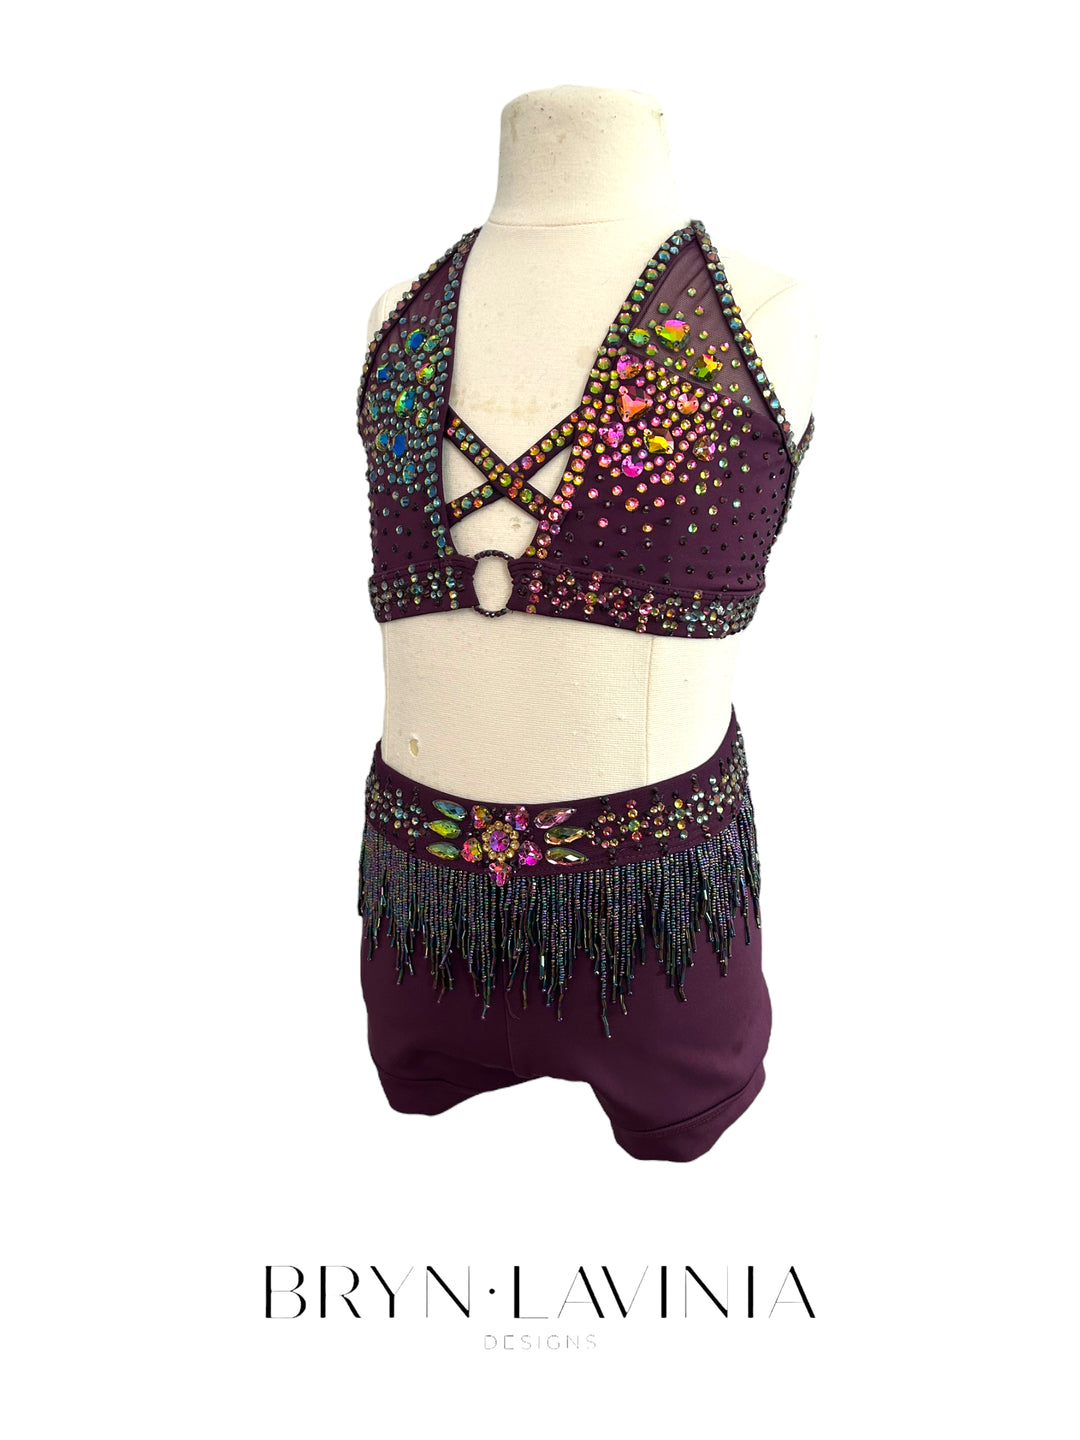 NEW CL Plum ready to ship costume